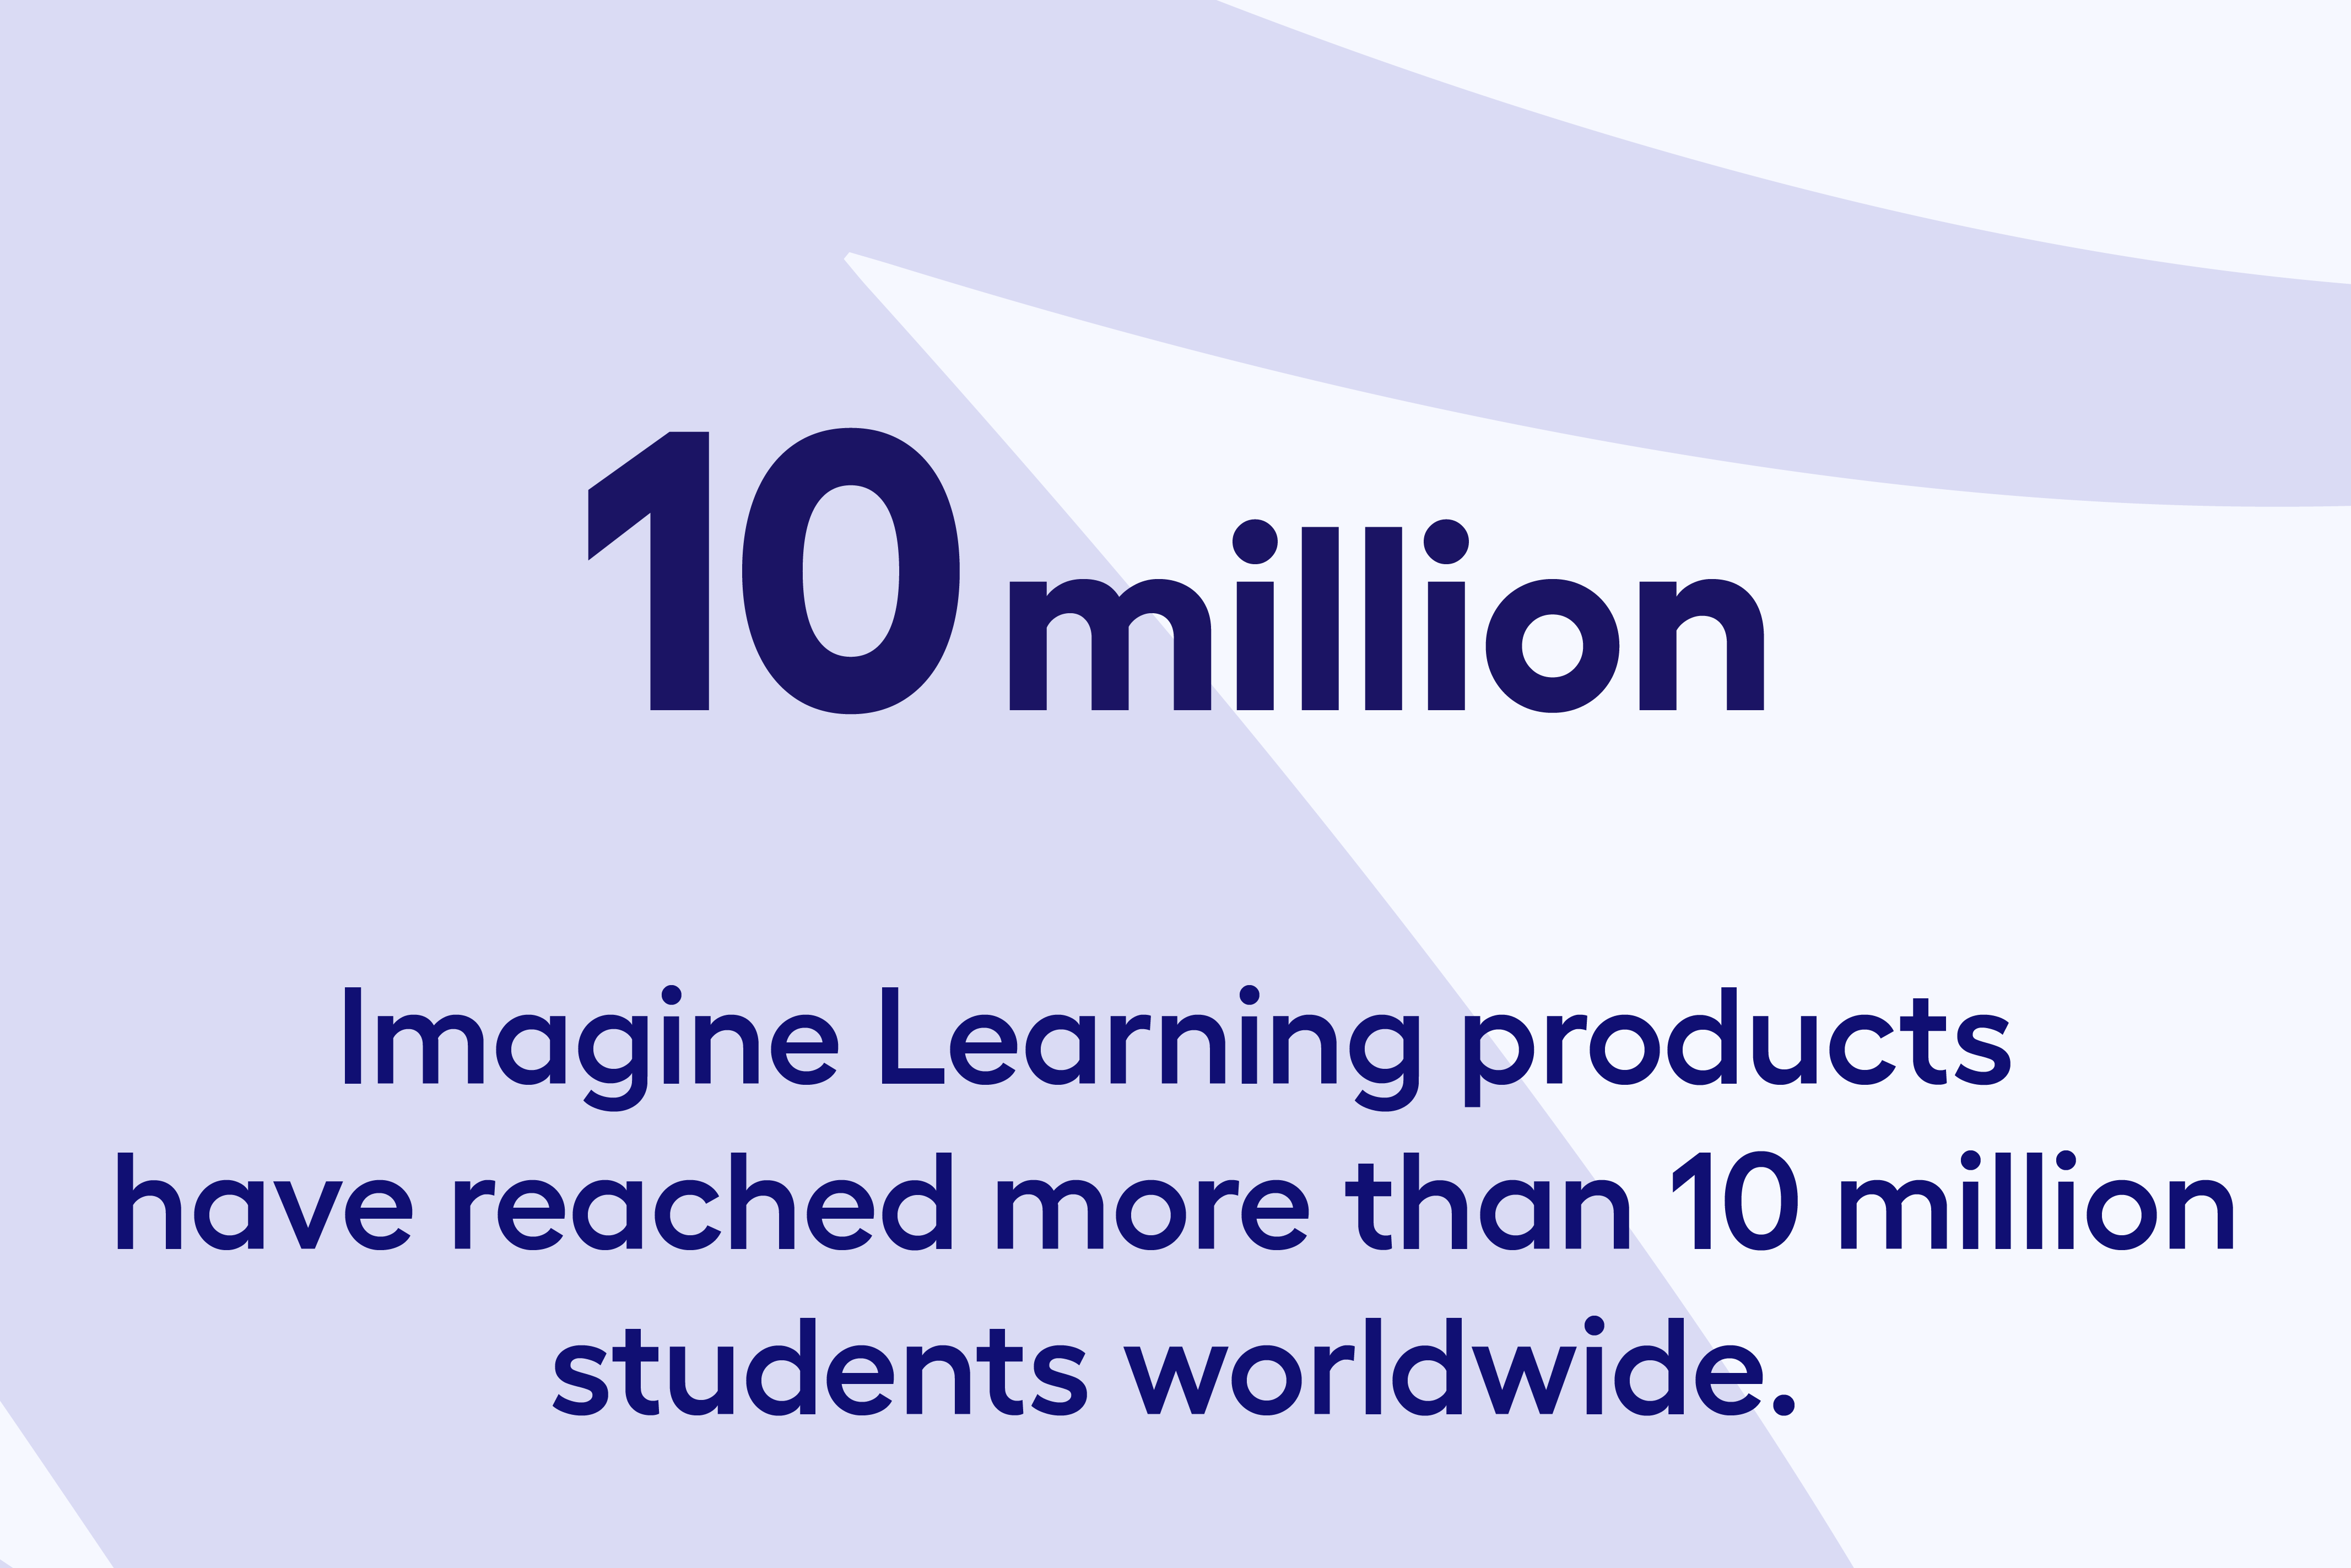 Infographic | Imagine Learning products have reached more than 10 million students worldwide